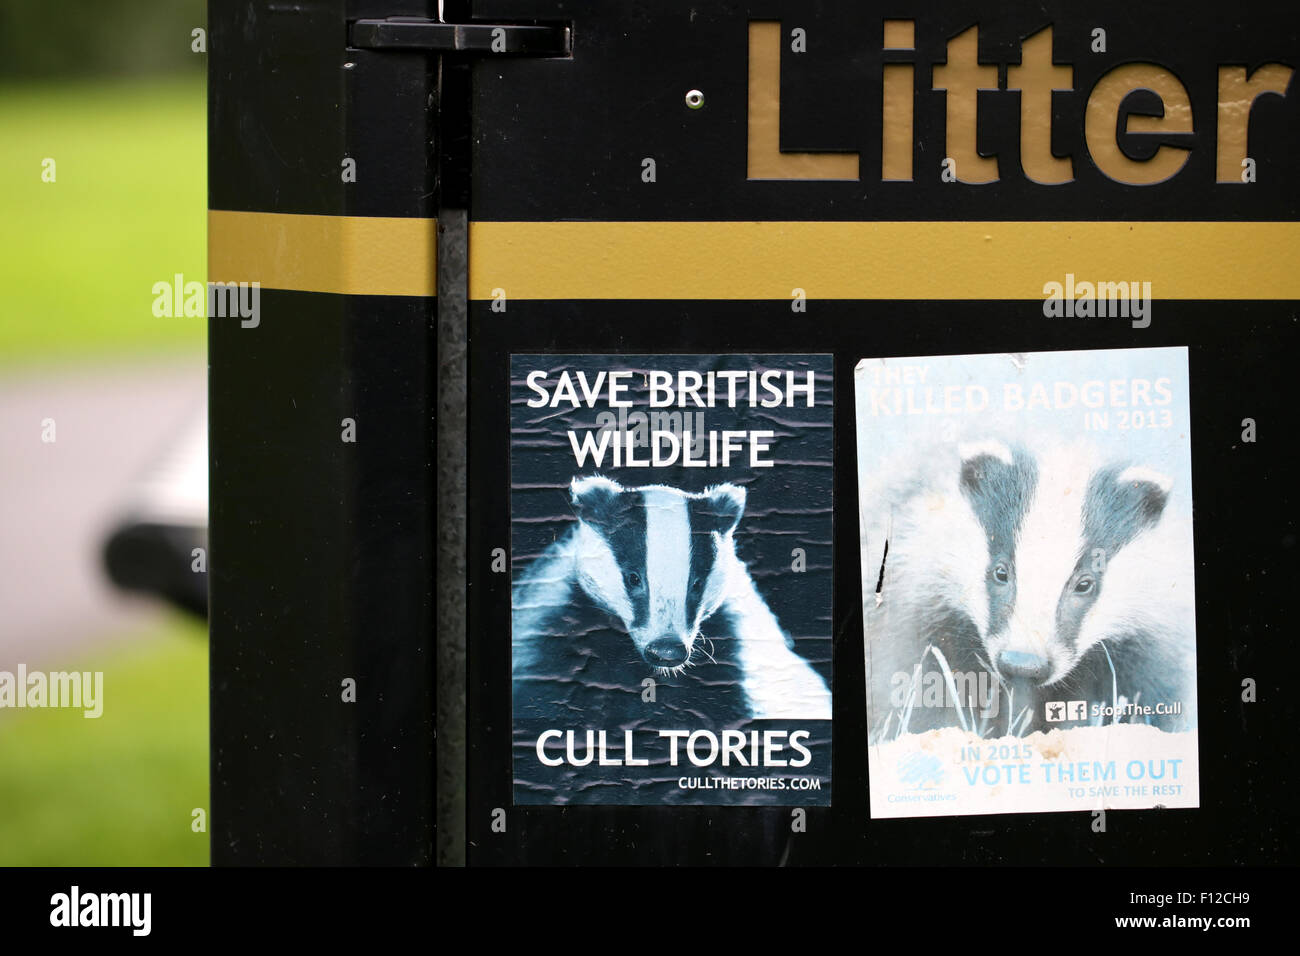 A protest poster supporting British Wildflife in relation to the Badger cull  in south west England. This is linked to the spread of BTB to cattle. Stock Photo